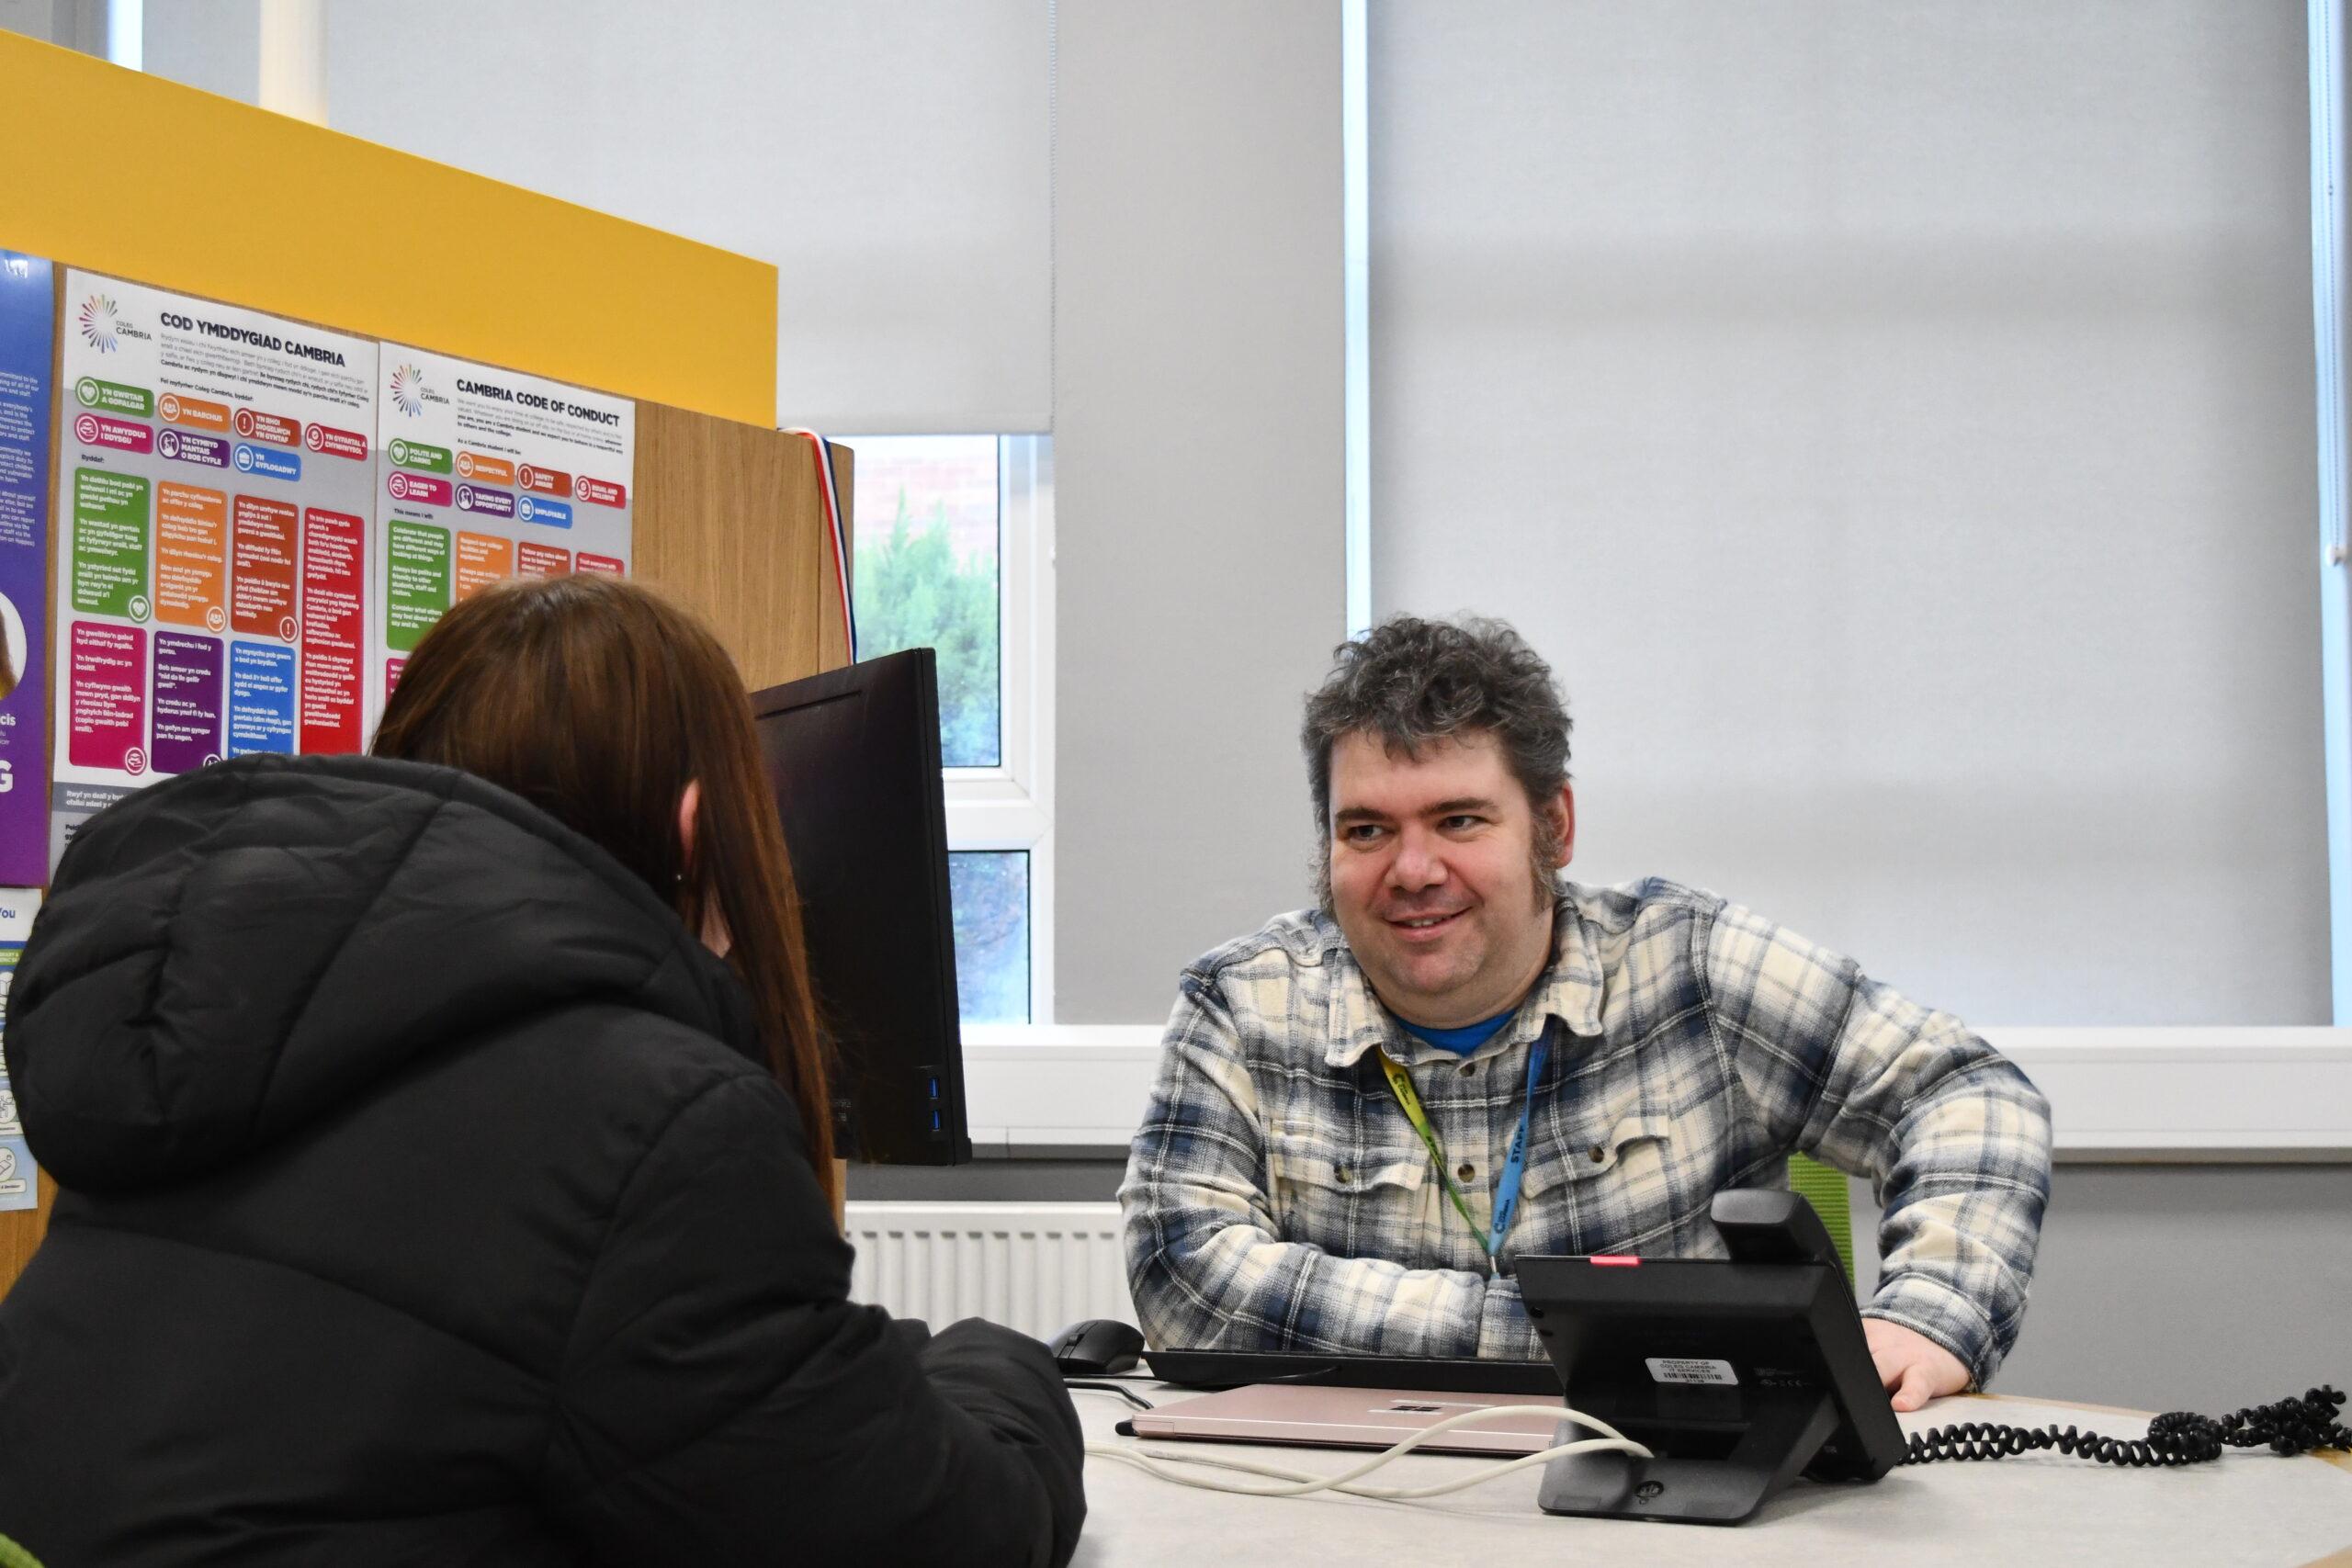 Student Services and Careers Advisor Christopher Fazey speaking with a student